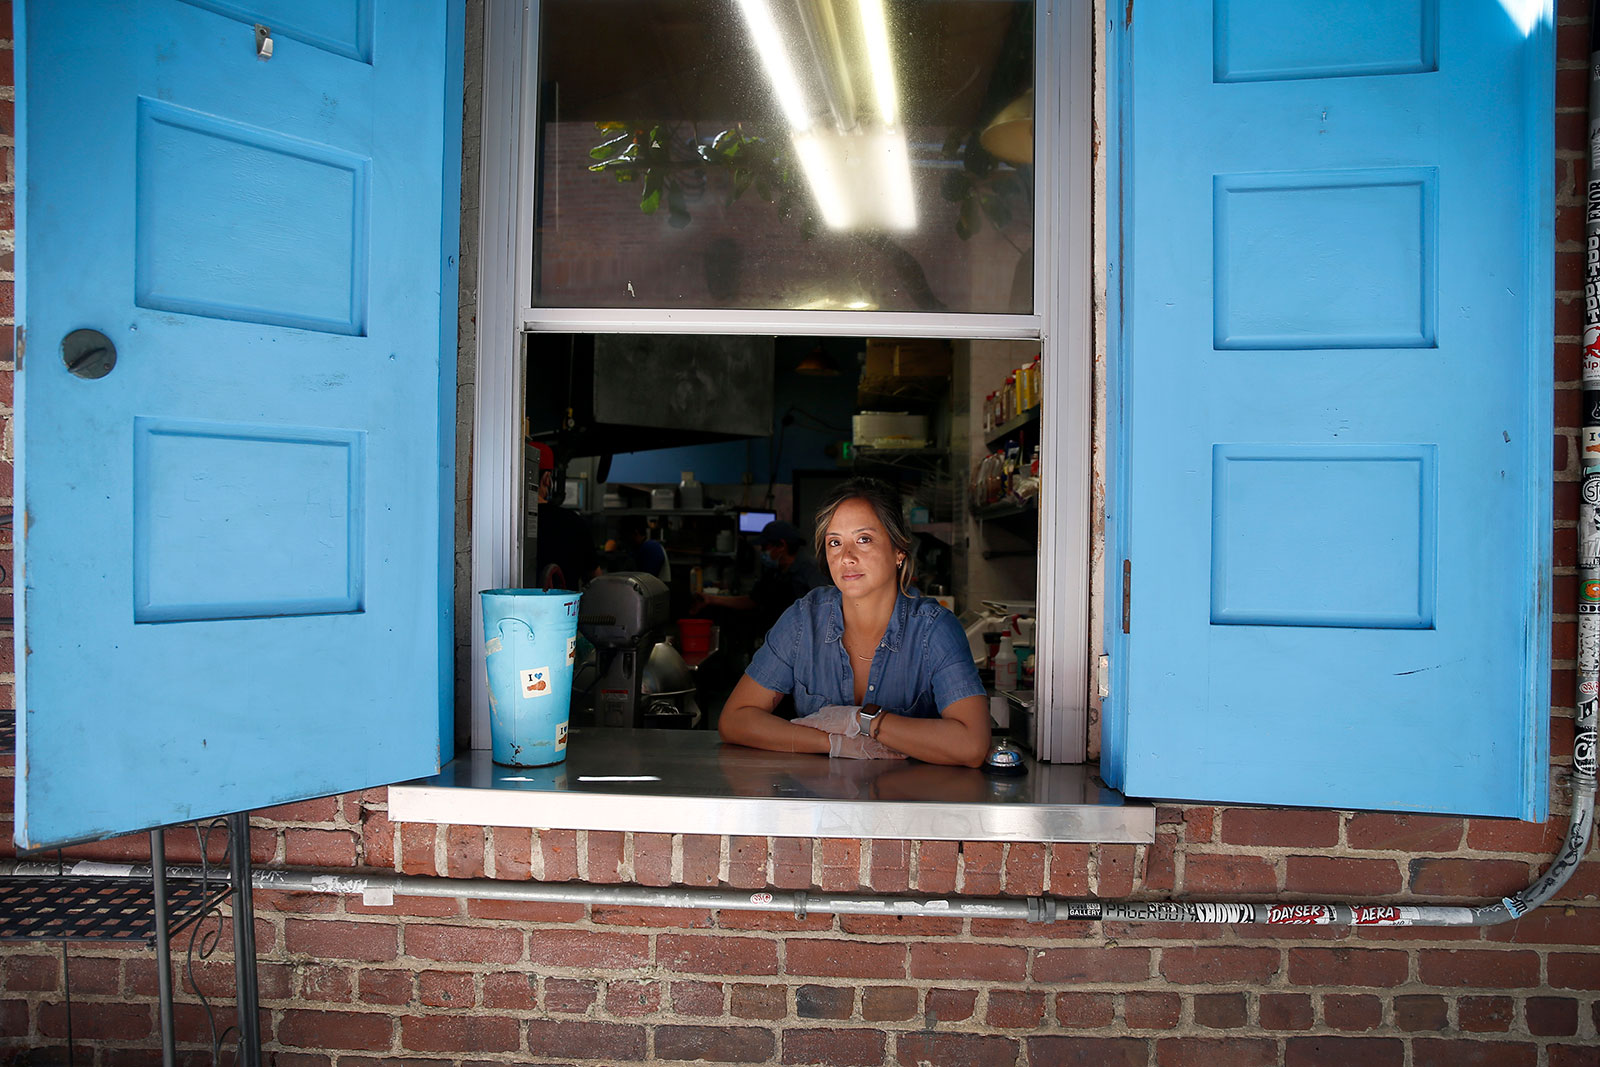 Deanna Sison stands at the window where she takes to-go orders at her restaurant in San Francisco, California.